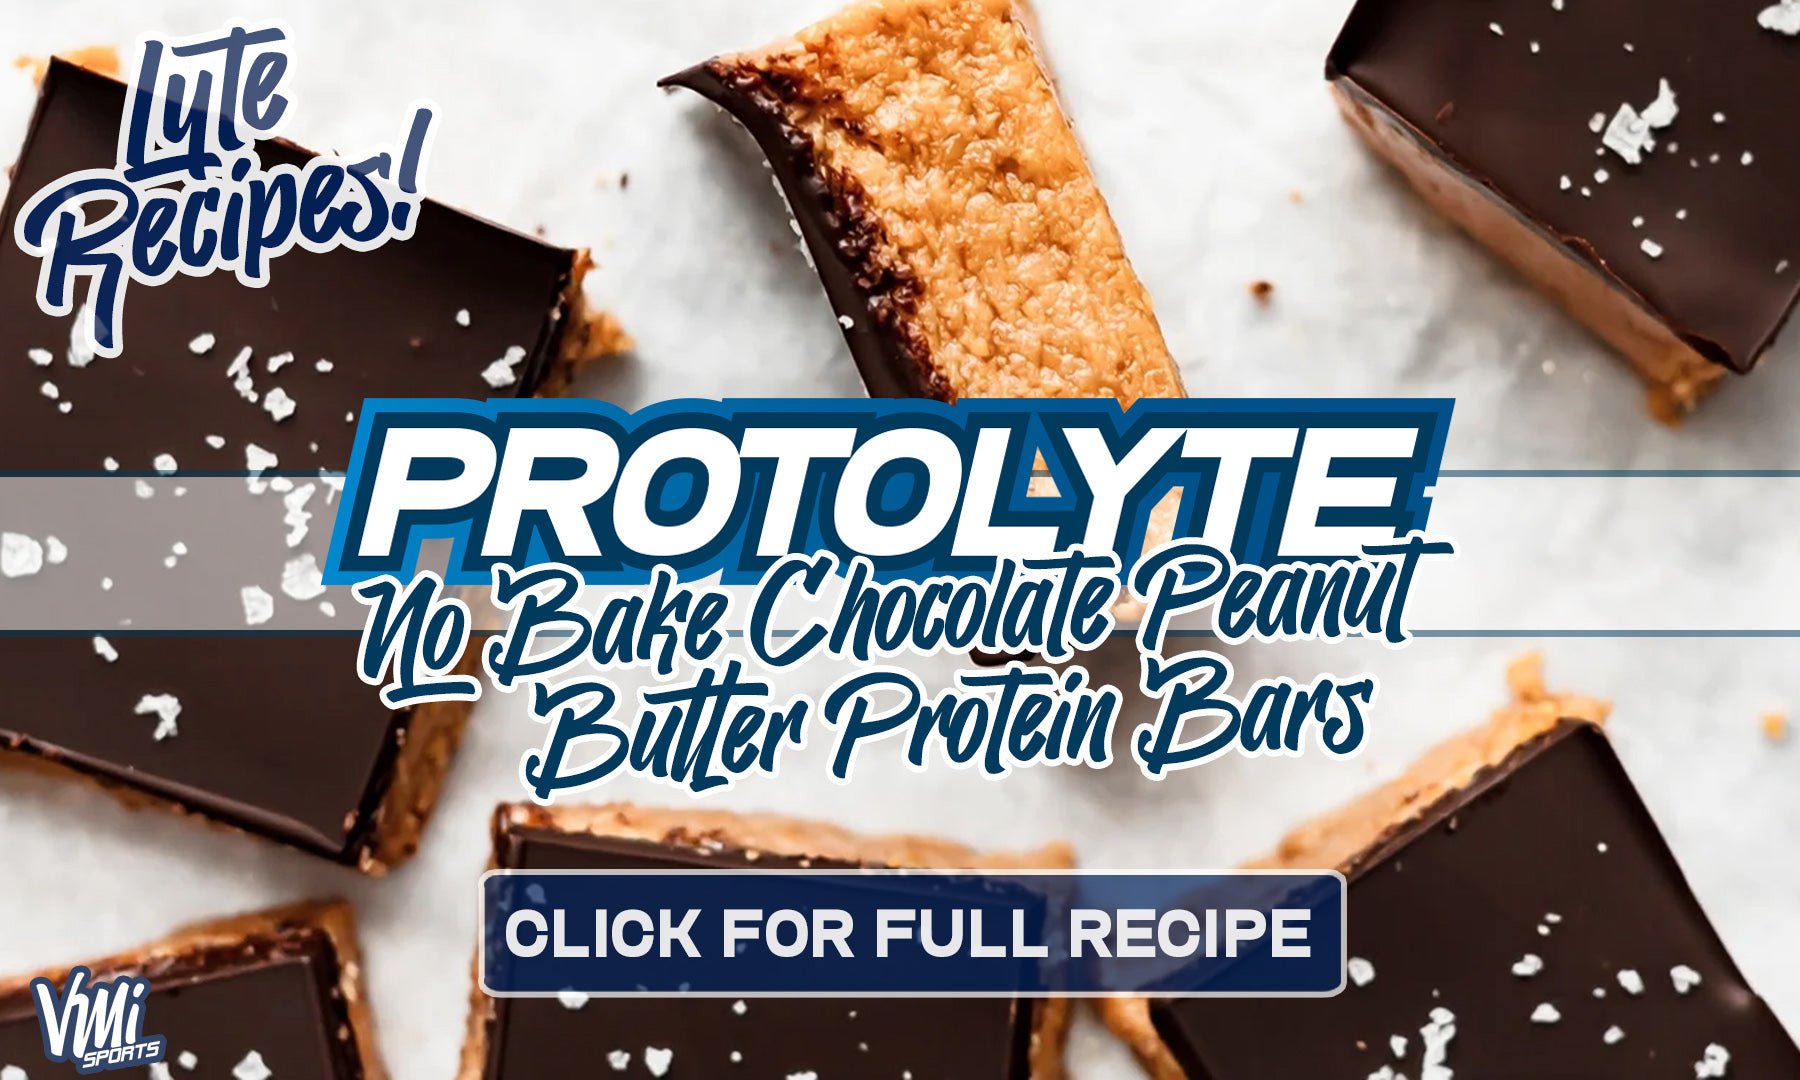 NO BAKE CHOCOLATE PEANUT BUTTER PROTEIN BARS